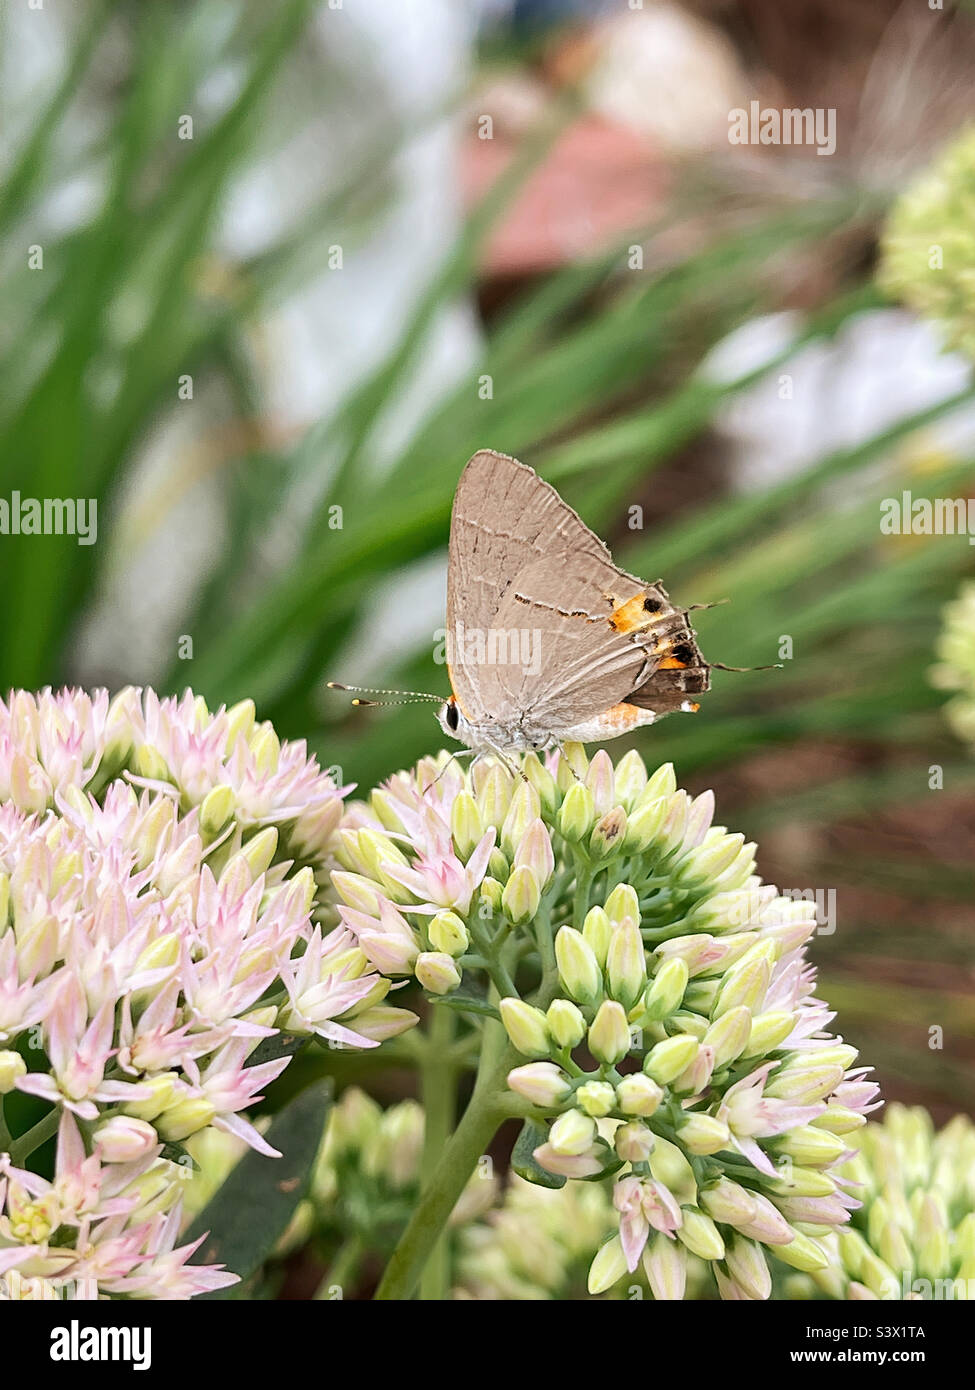 The gray hairstreak is also called the bean lycaenid or cotton square borer. It is on an Autumn Joy sedum flower. Stock Photo